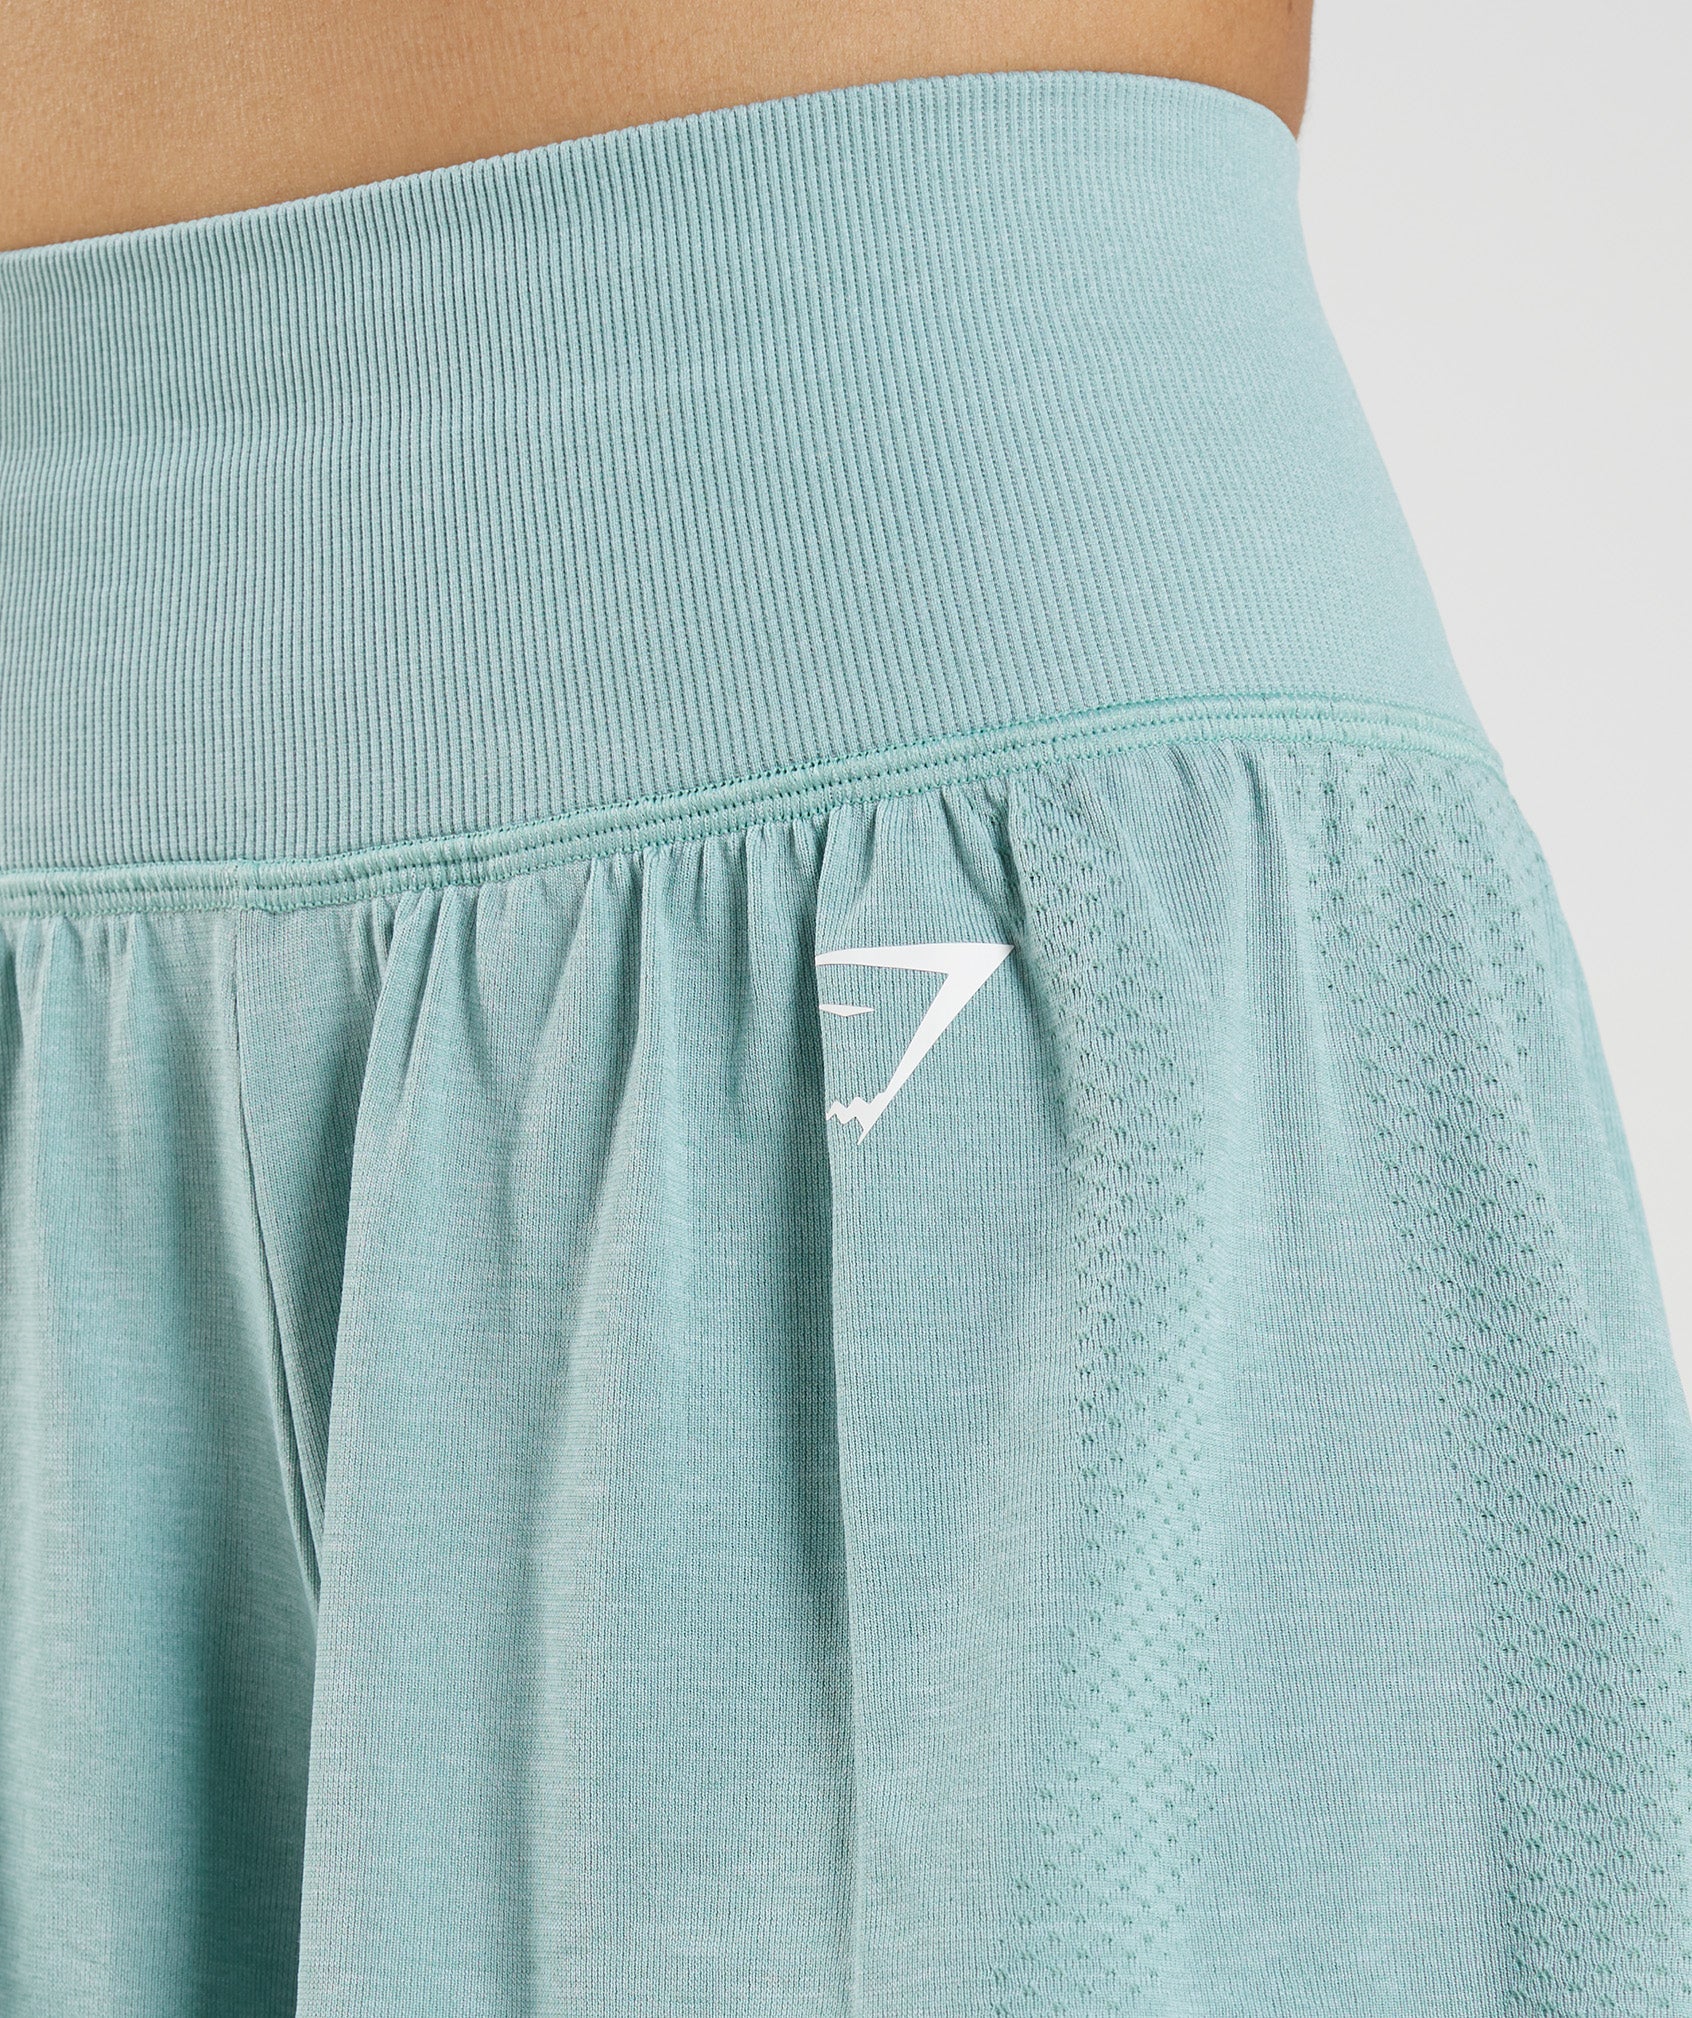 Vital Seamless 2.0 2-in-1 Shorts in Pearl Blue Marl - view 5